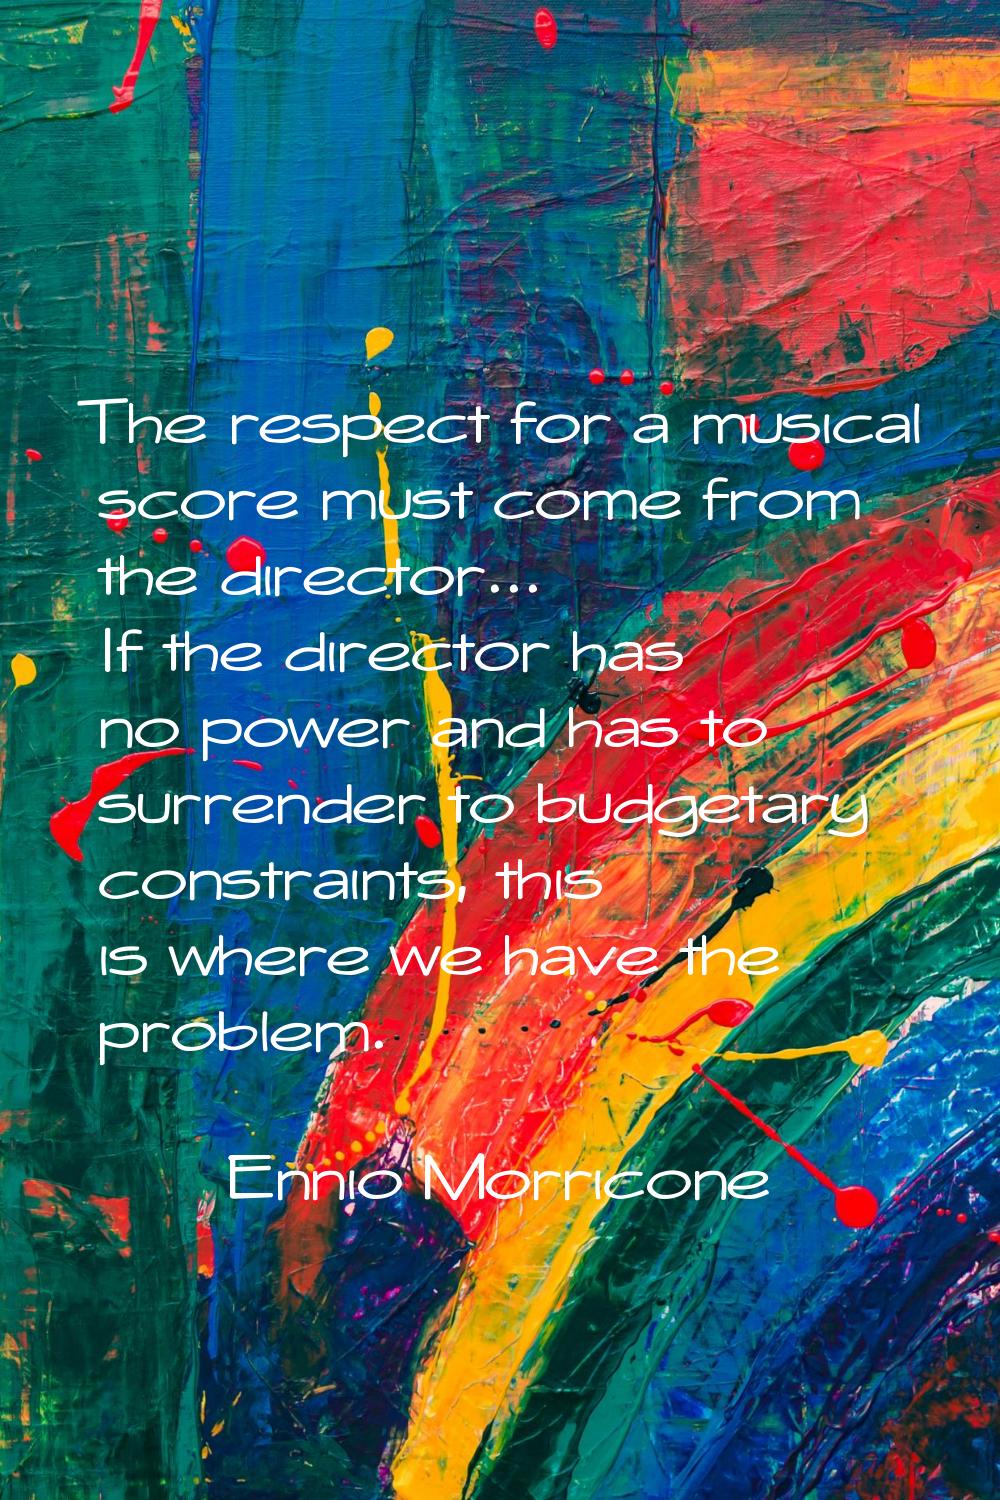 The respect for a musical score must come from the director... If the director has no power and has